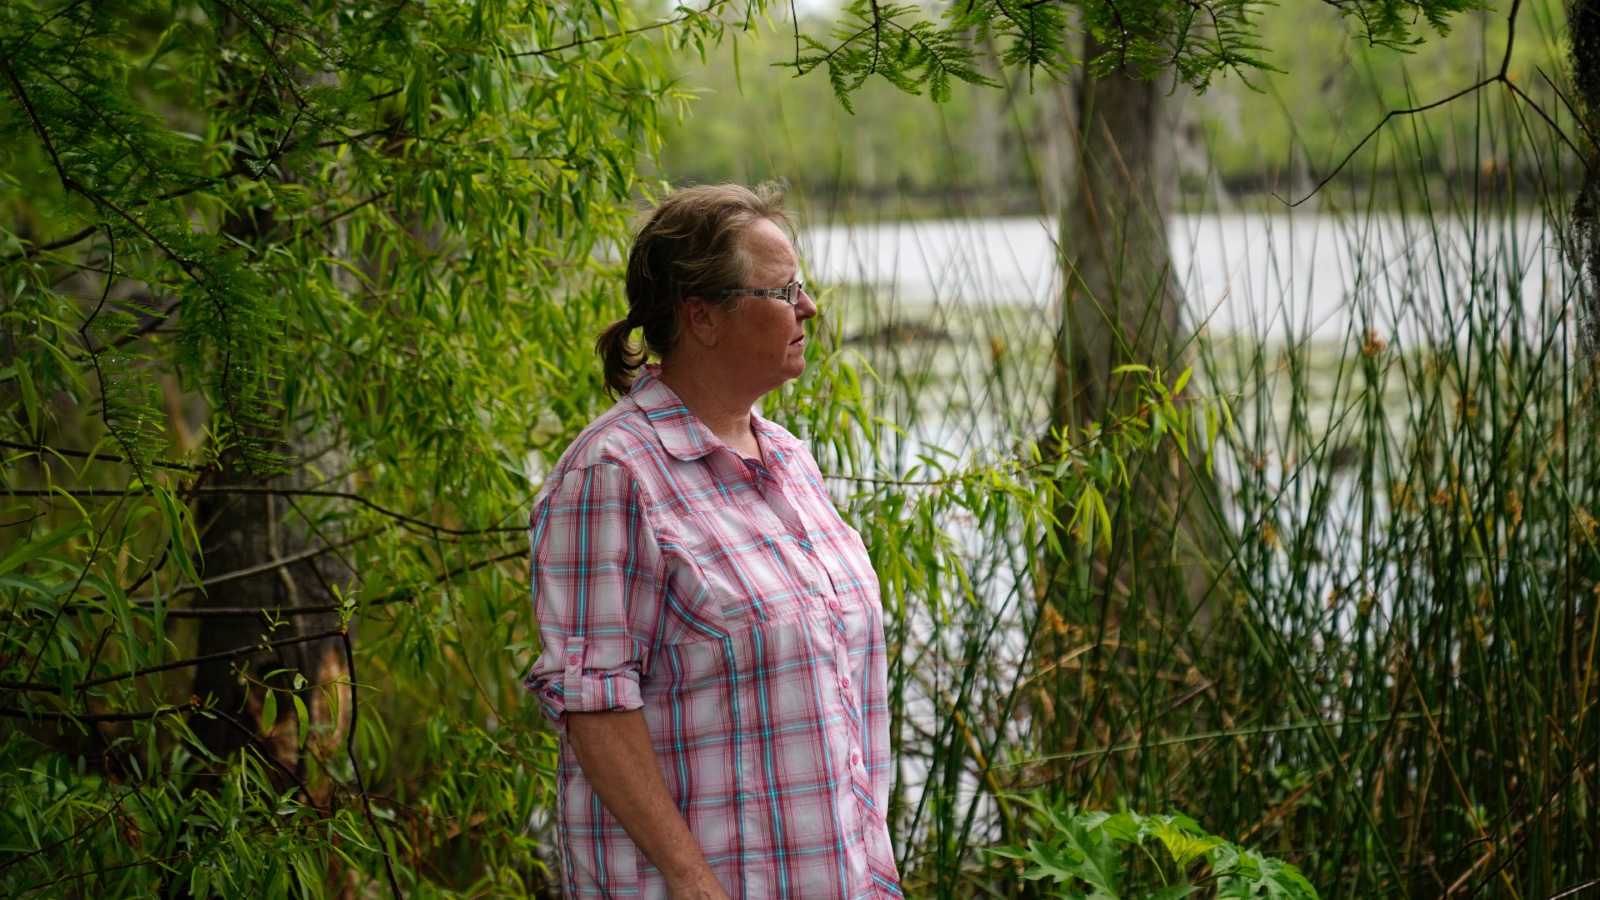 A concerned resident stands next to a river near Lake Maurepas in Louisiana, where she worries about the environmental impacts of new carbon capture projects.